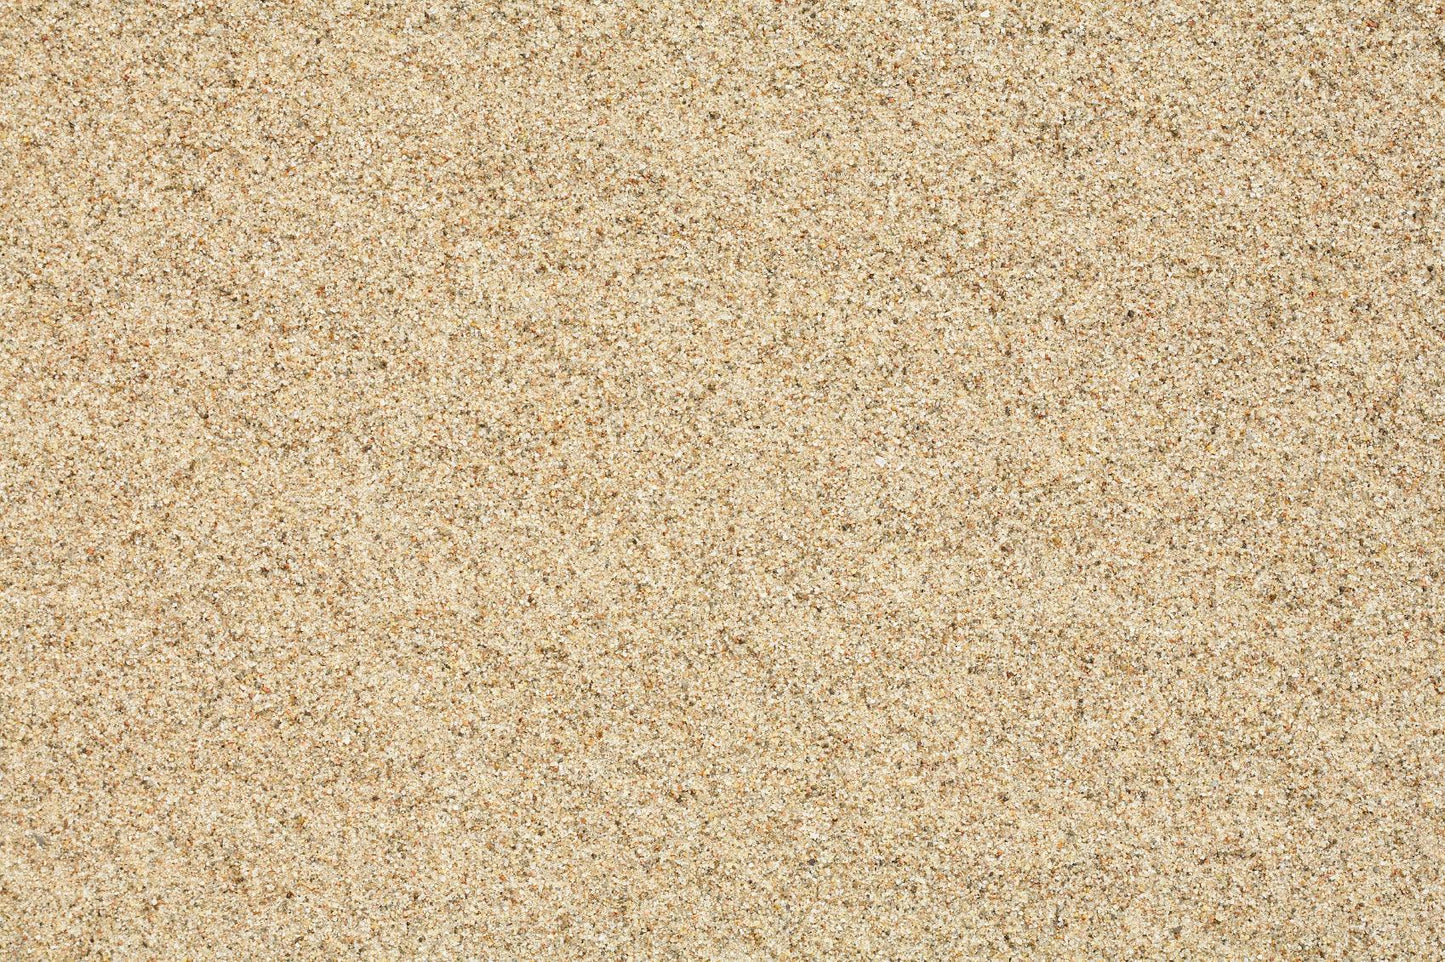 A close-up view of fine, light brown sand grains, uniformly spread across the image. The texture appears soft and slightly speckled, with a natural, earthy tone. Ideal for golf course bunker sand due to its even surface and superior non-staining property. Brisks Golf Course Bunker Sand is the perfect choice for maintaining your golf course's pristine bunkers.